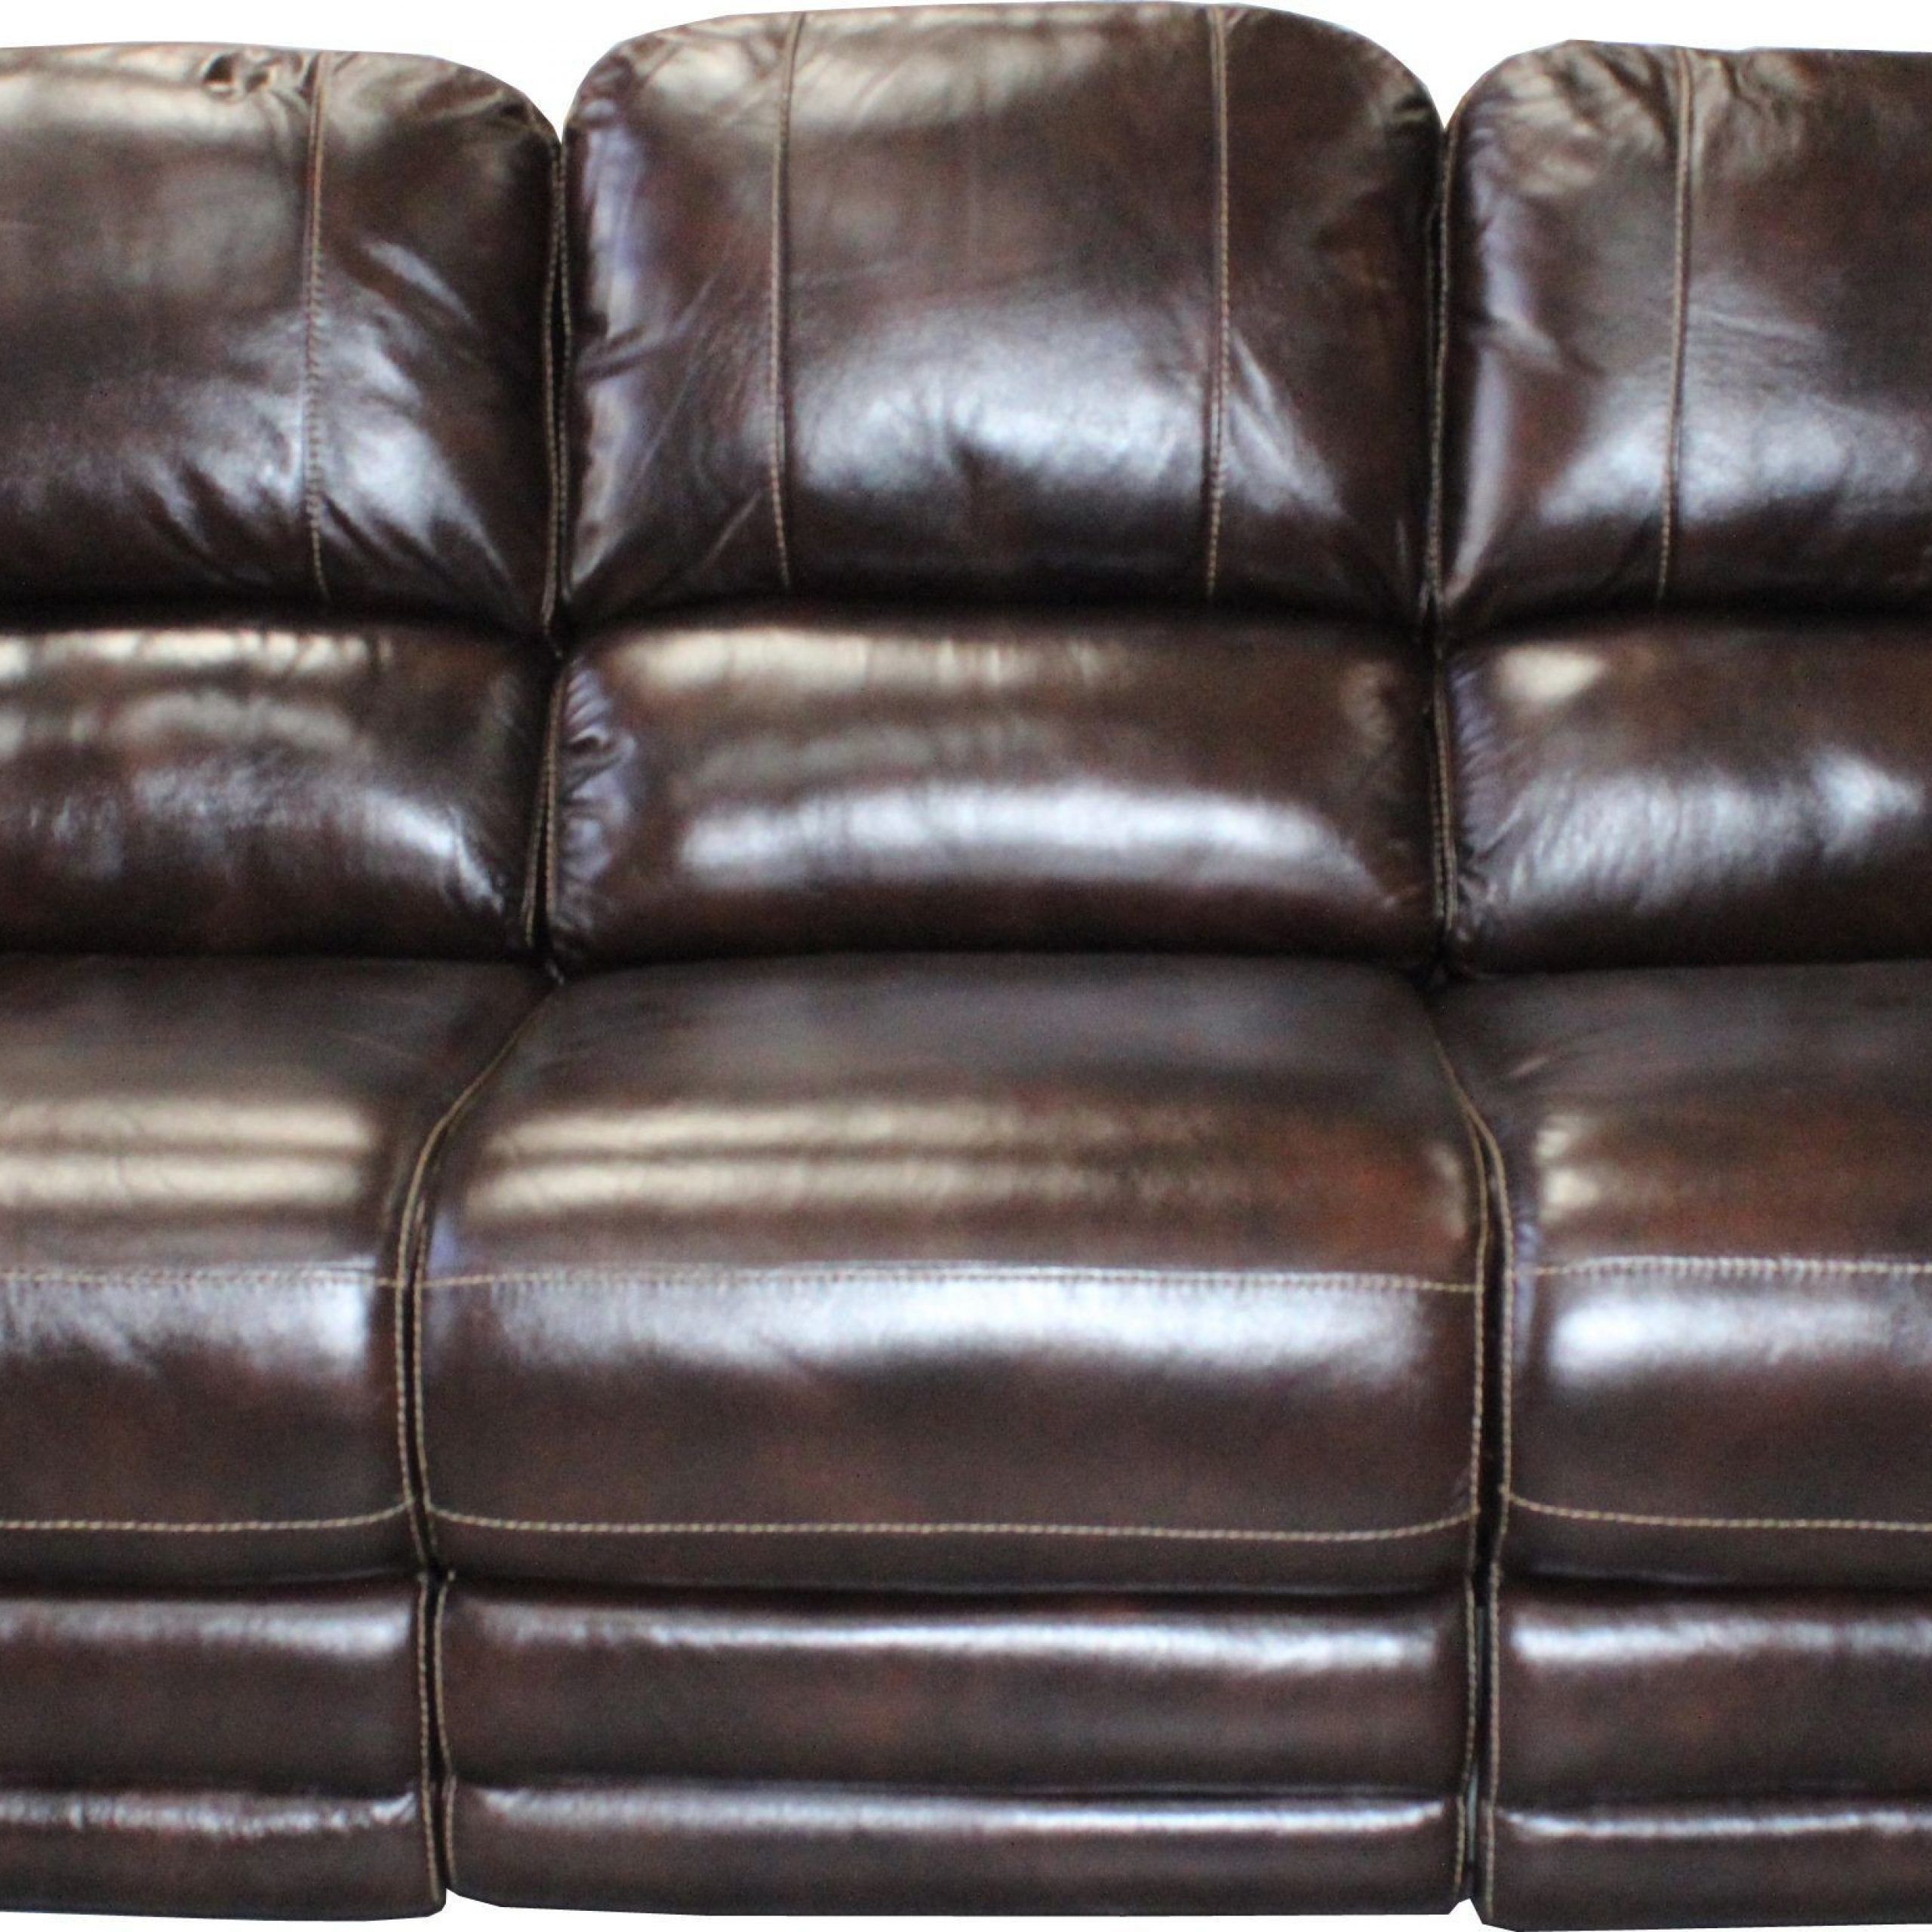 Thurston Shadow Dual Power Reclining Sofa From Parker Intended For Power Reclining Sofas (View 15 of 15)